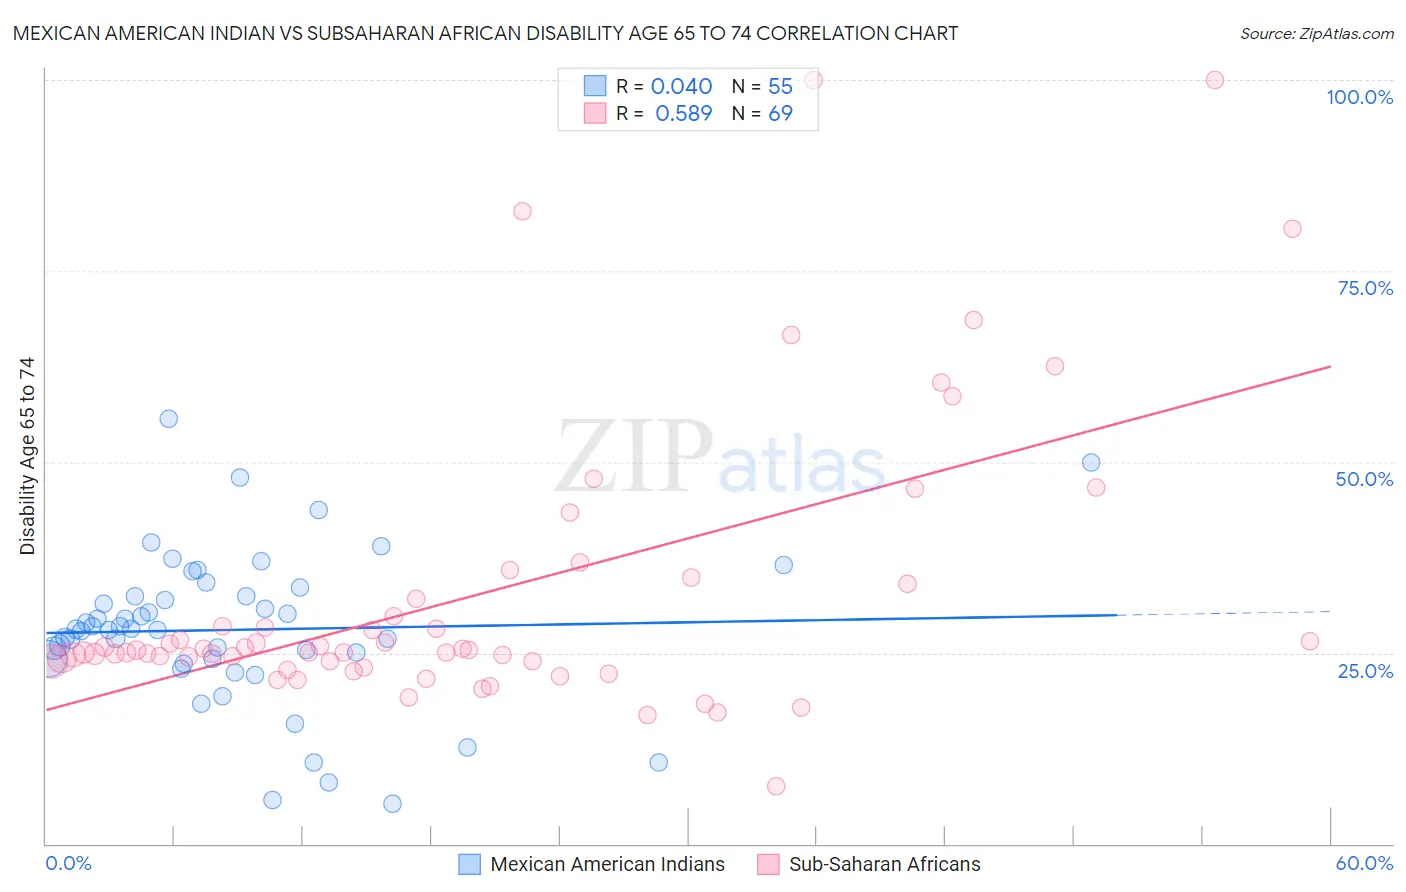 Mexican American Indian vs Subsaharan African Disability Age 65 to 74